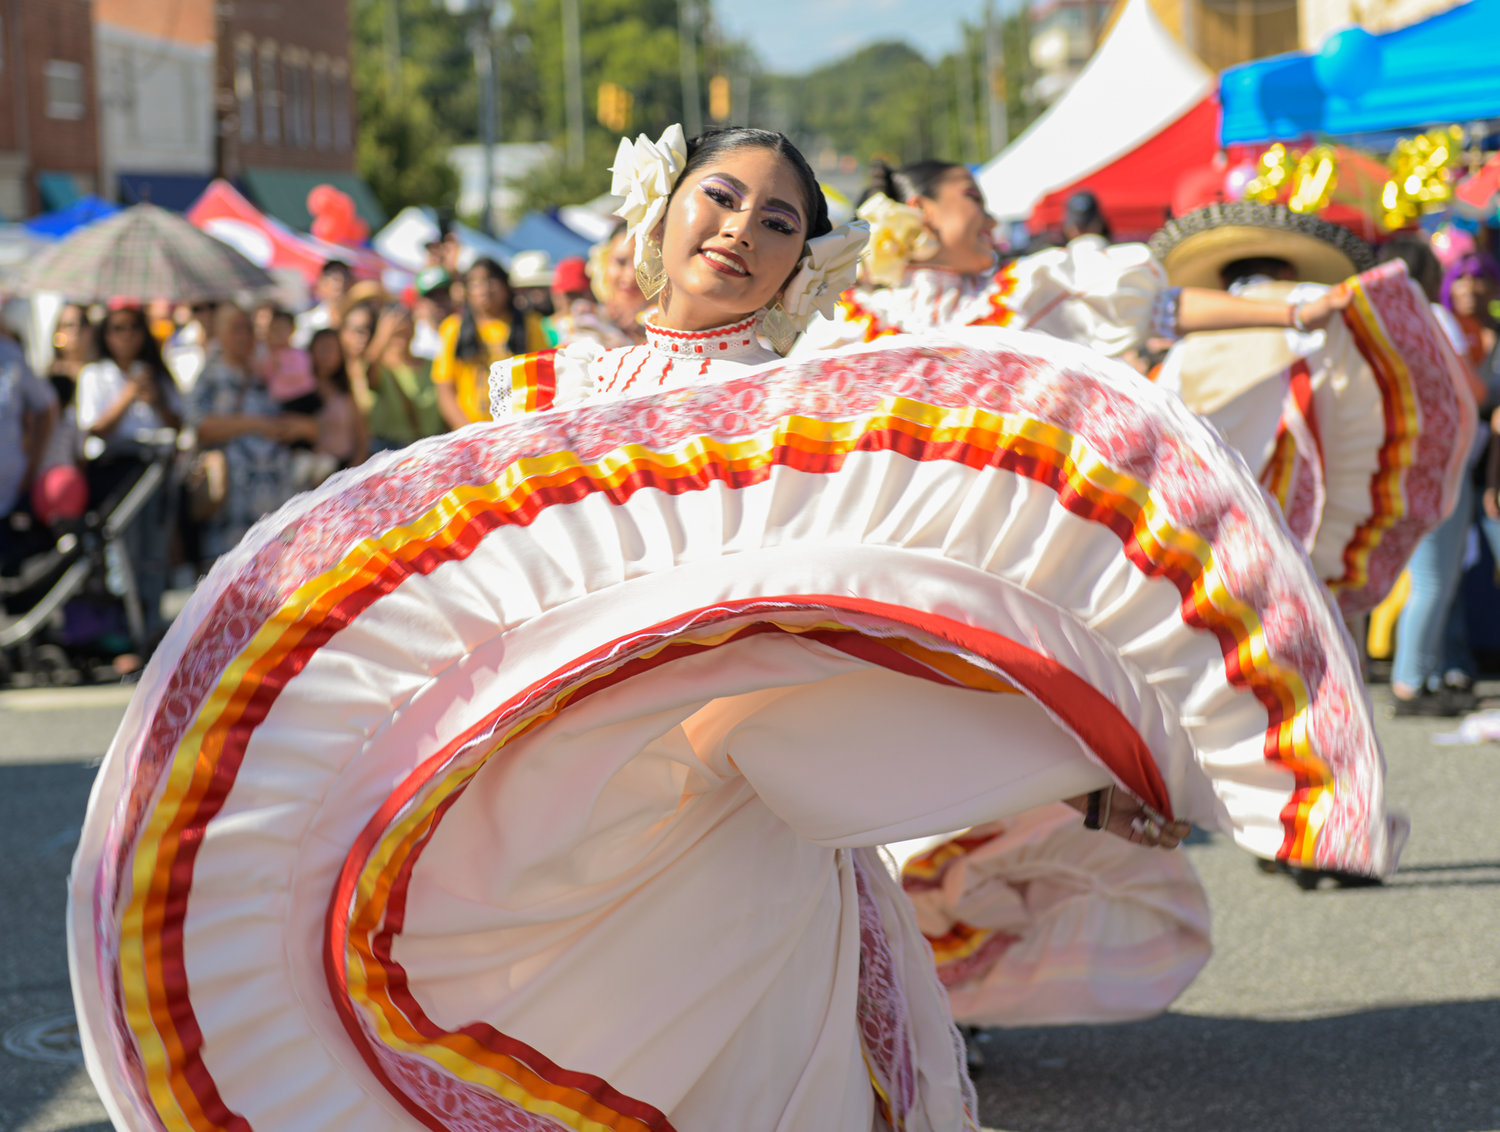 A Balet Folklorico dancer enchants the eye of the camera at The Hispanic Heritage Festival.